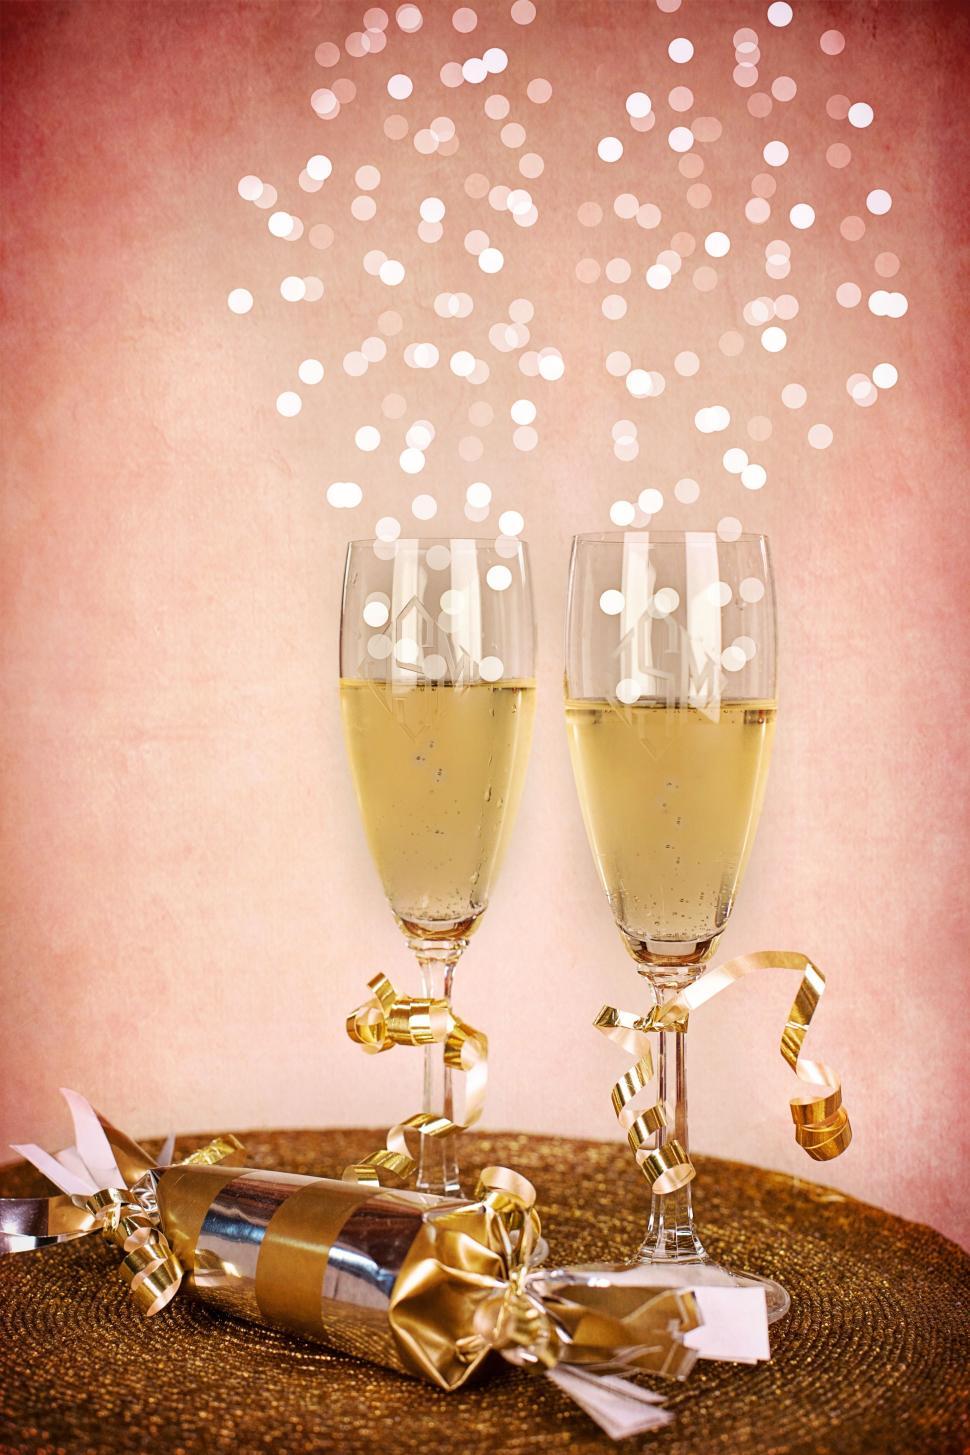 Free Image of Champagne glasses 